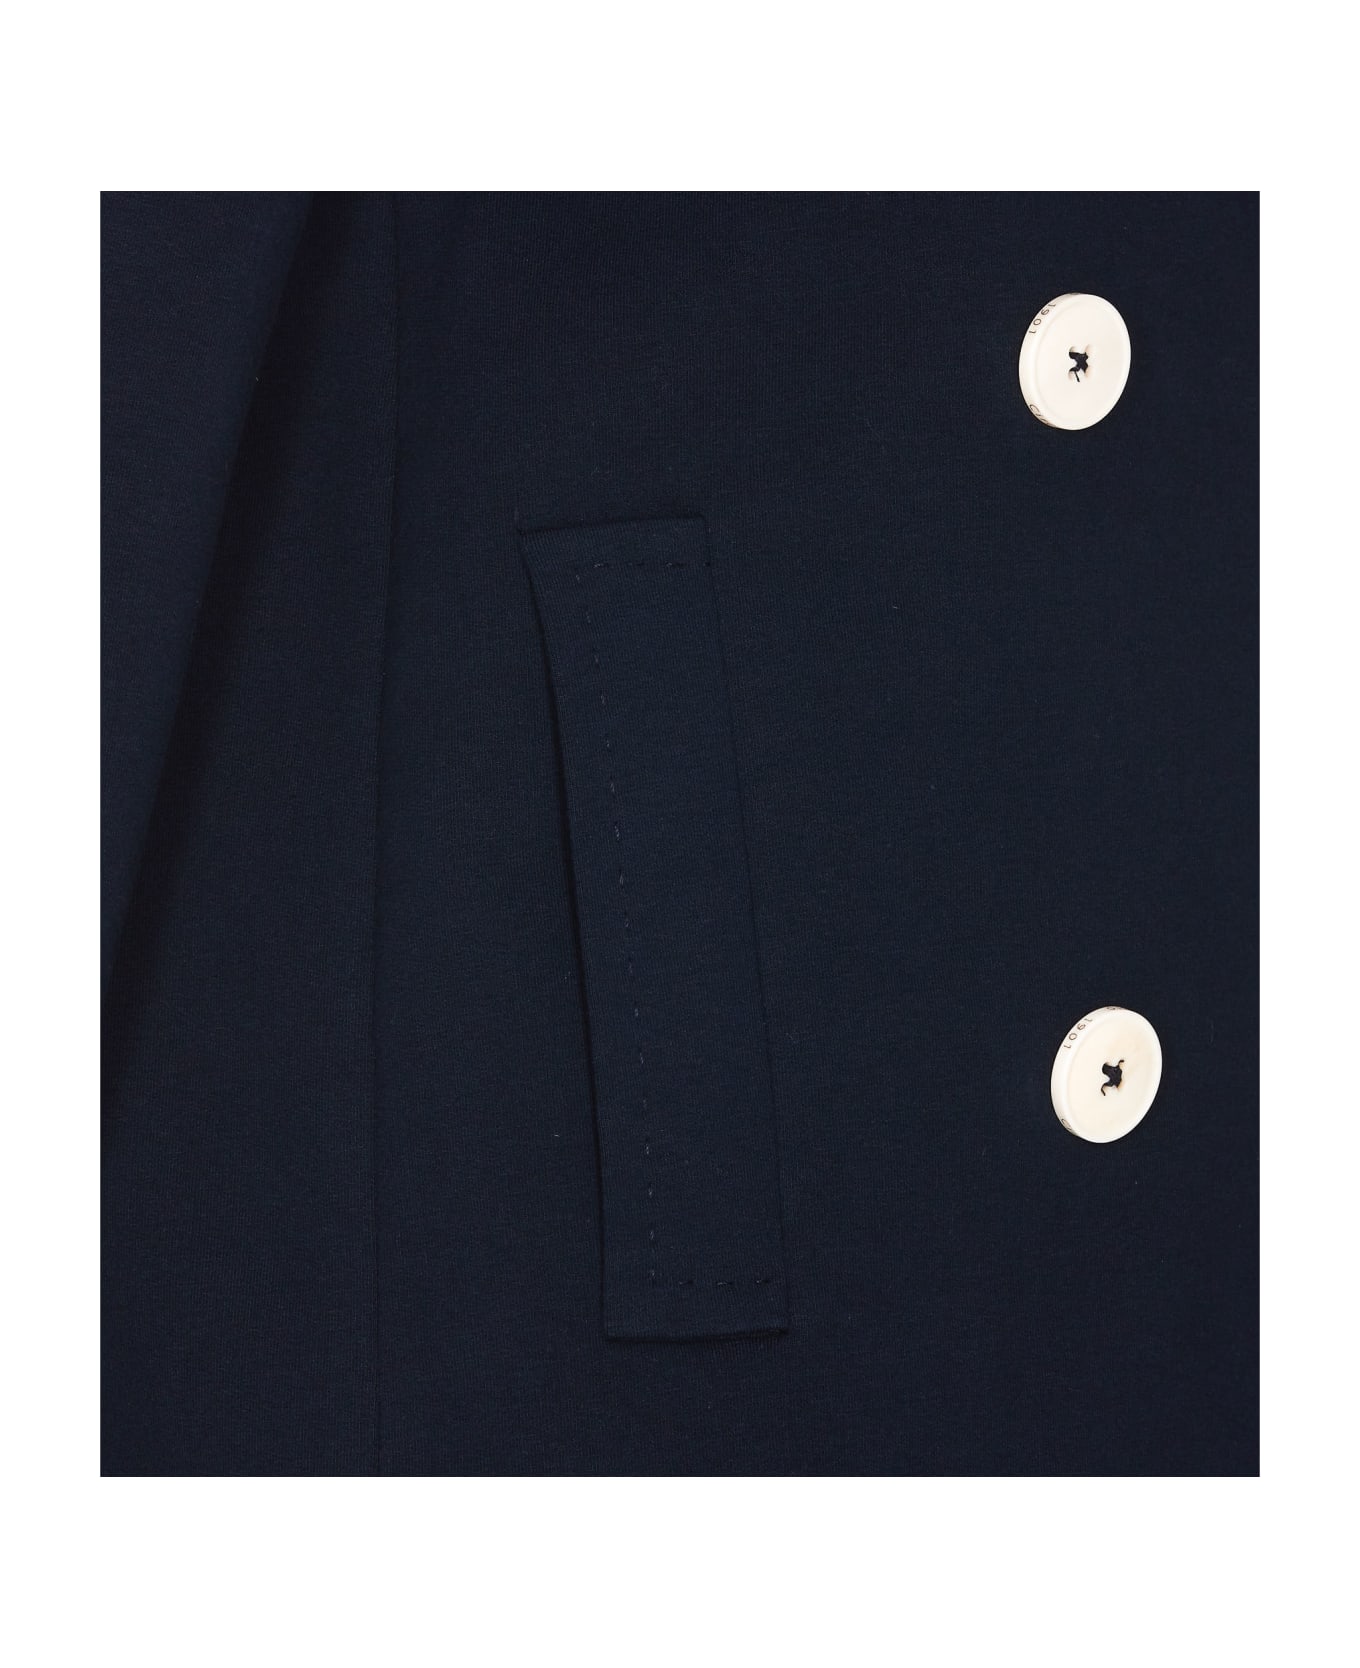 Circolo 1901 Double Breasted Jacket - Blue